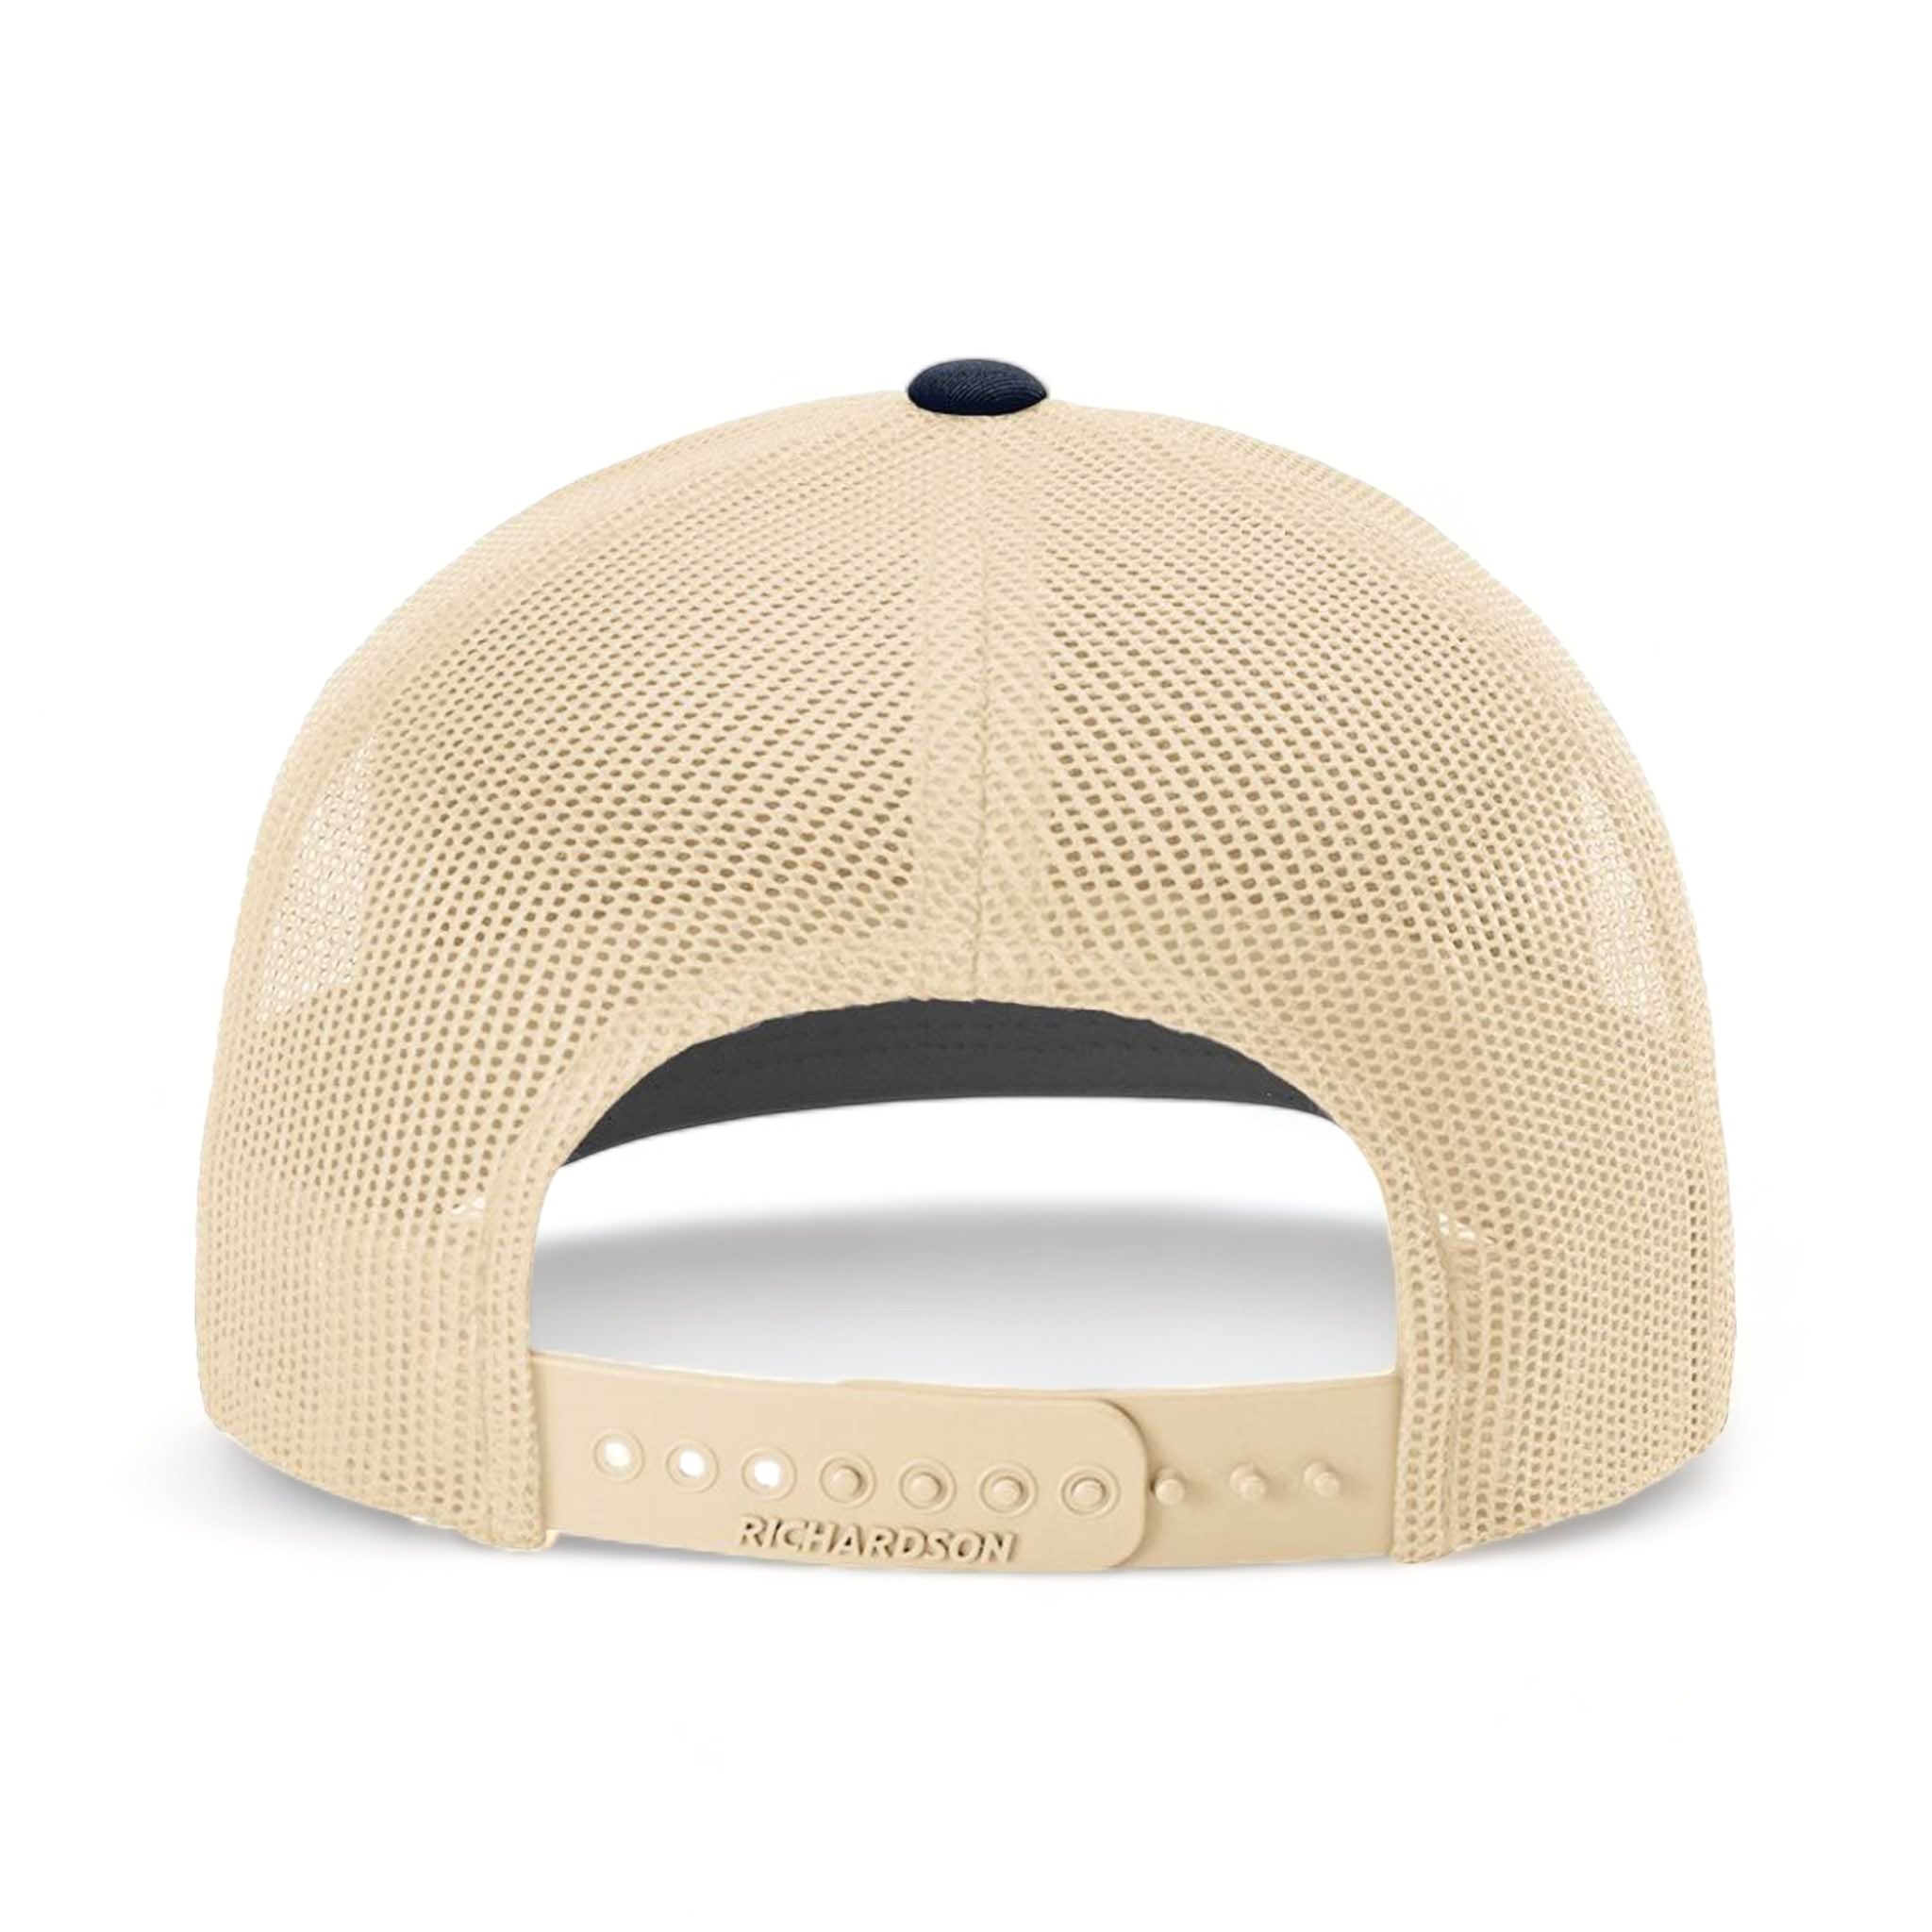 Back view of Richardson 112 custom hat in navy and khaki